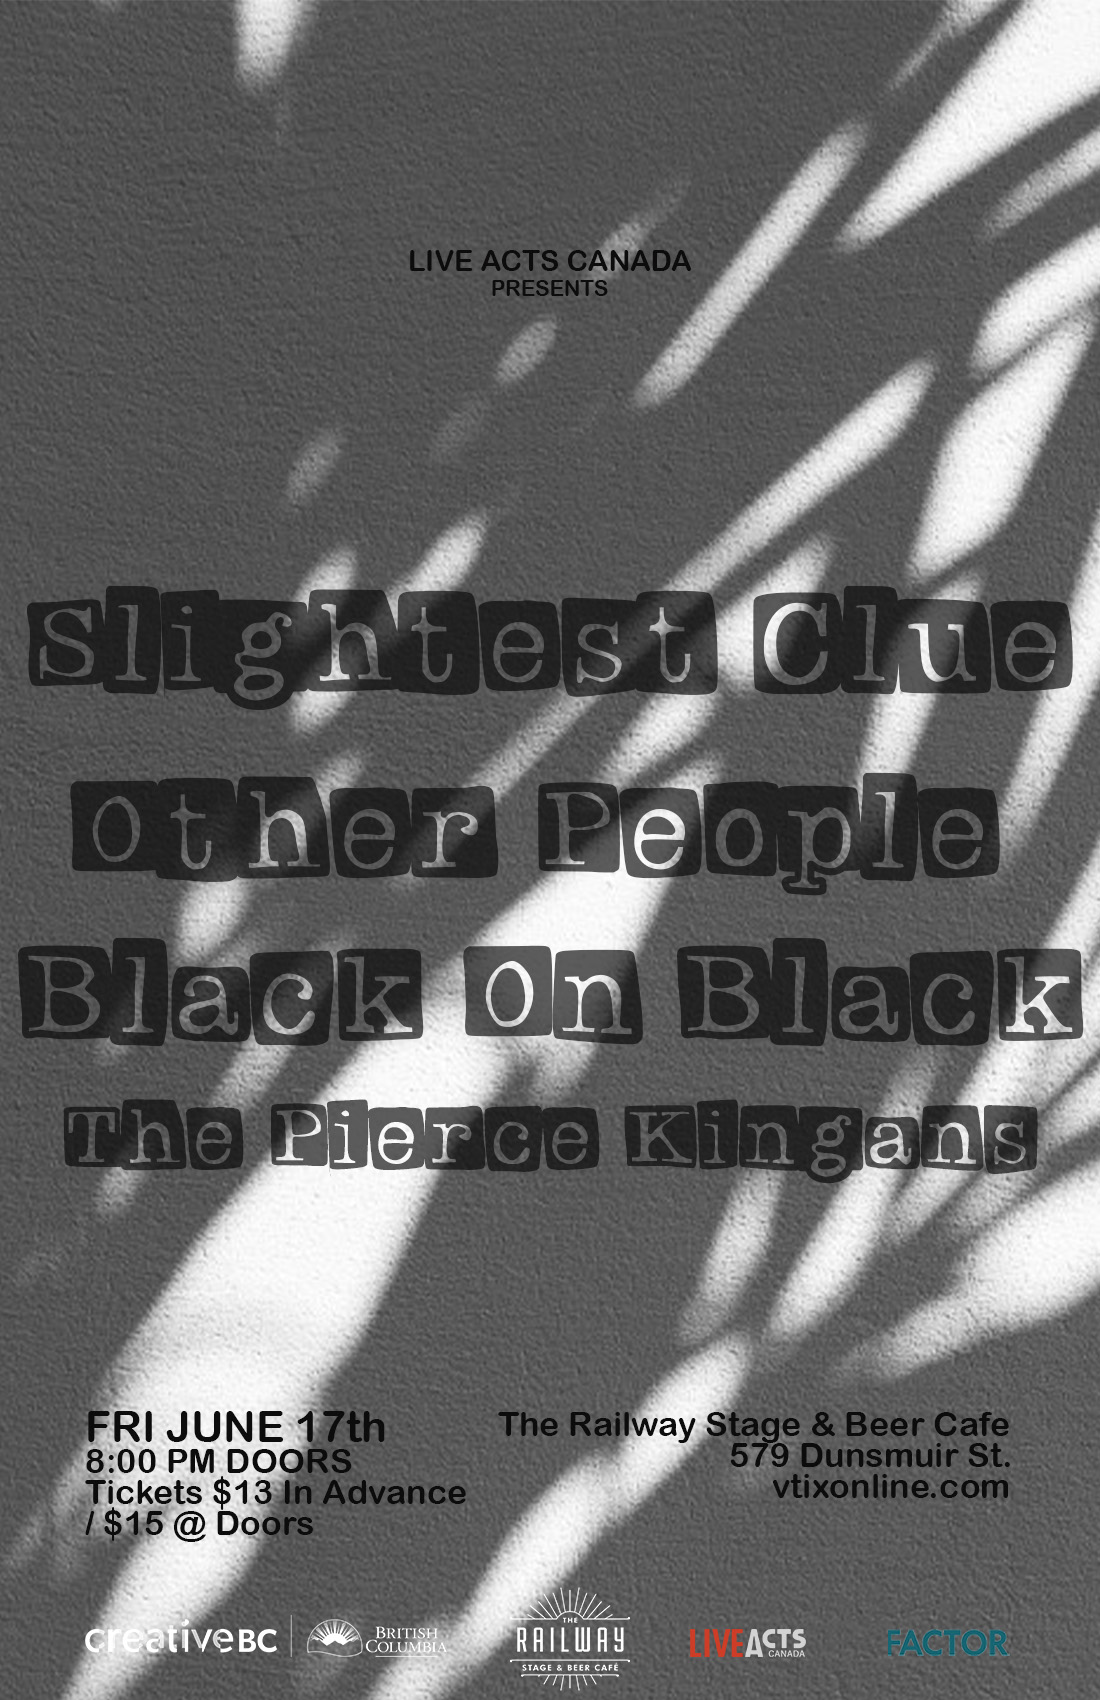 Slightest Clue With Special Guests, Other People, Black On Black, and The Pierce Kingans